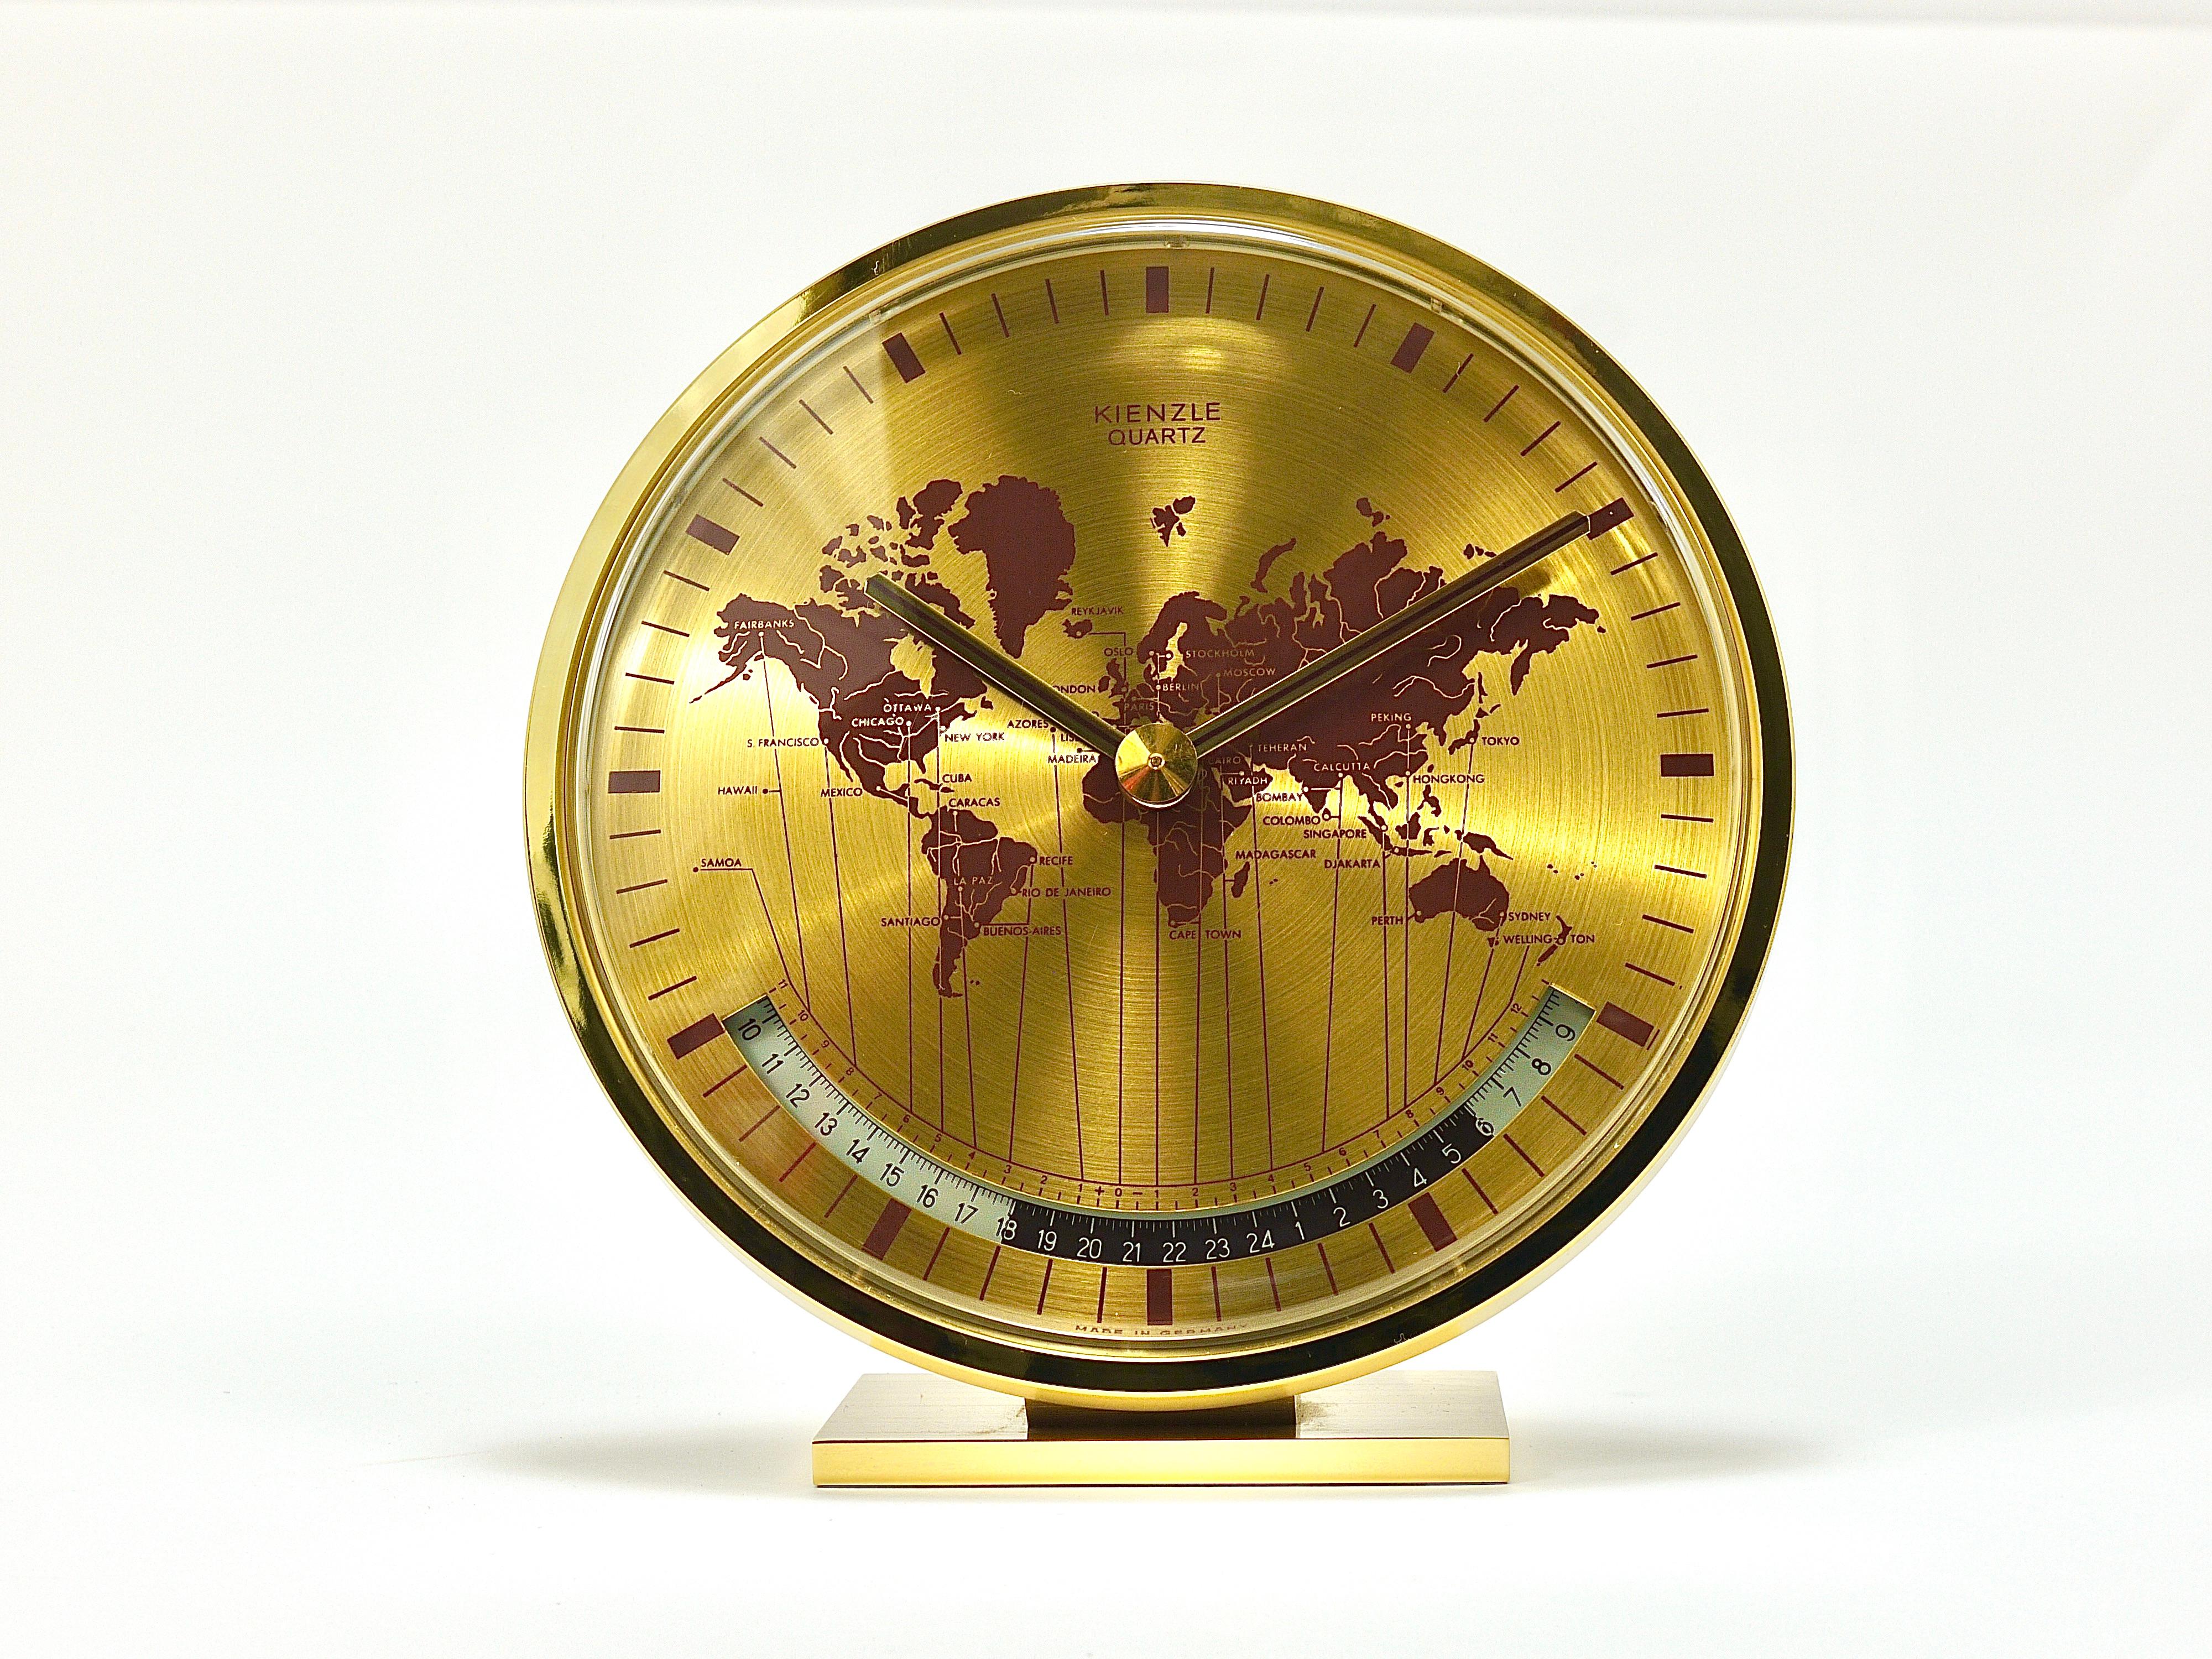 Mid-Century Modern Kienzle GMT World Time Zone Brass Table Clock, Midcentury, Germany, 1960s For Sale